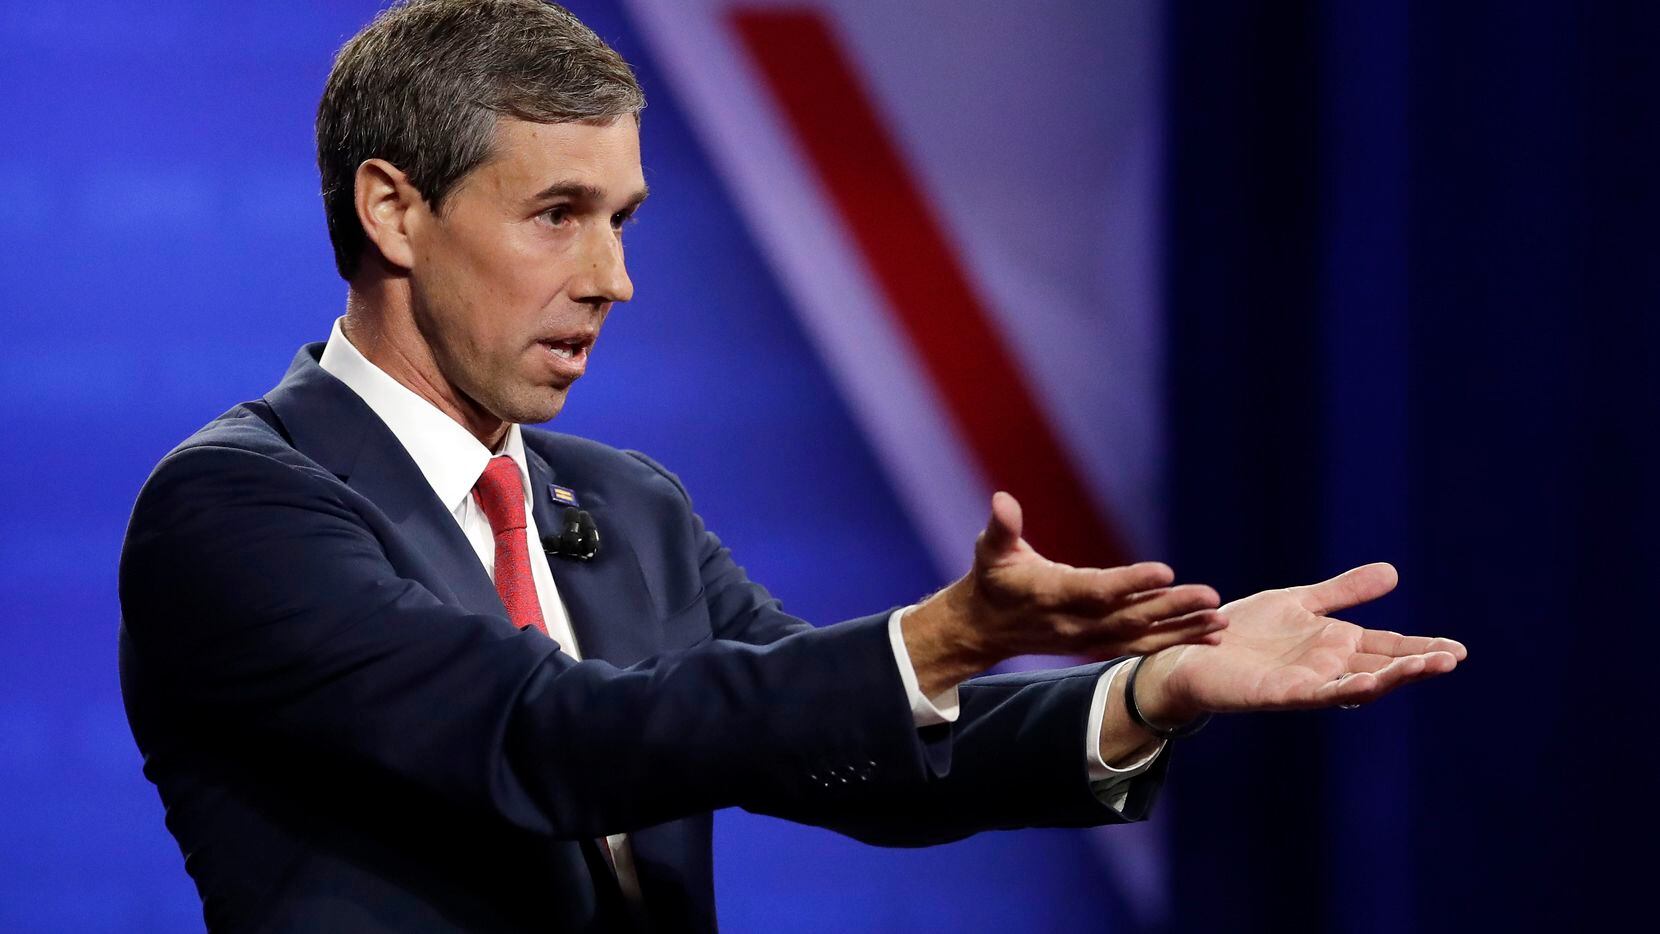 Beto O'Rourke, a former El Paso congressman, speaks during the Power of our Pride Town Hall on CNN on Thursday, Oct. 10, 2019, in Los Angeles. The LGBTQ-focused town hall featured nine 2020 Democratic presidential candidates. (AP Photo/Marcio Jose Sanchez)